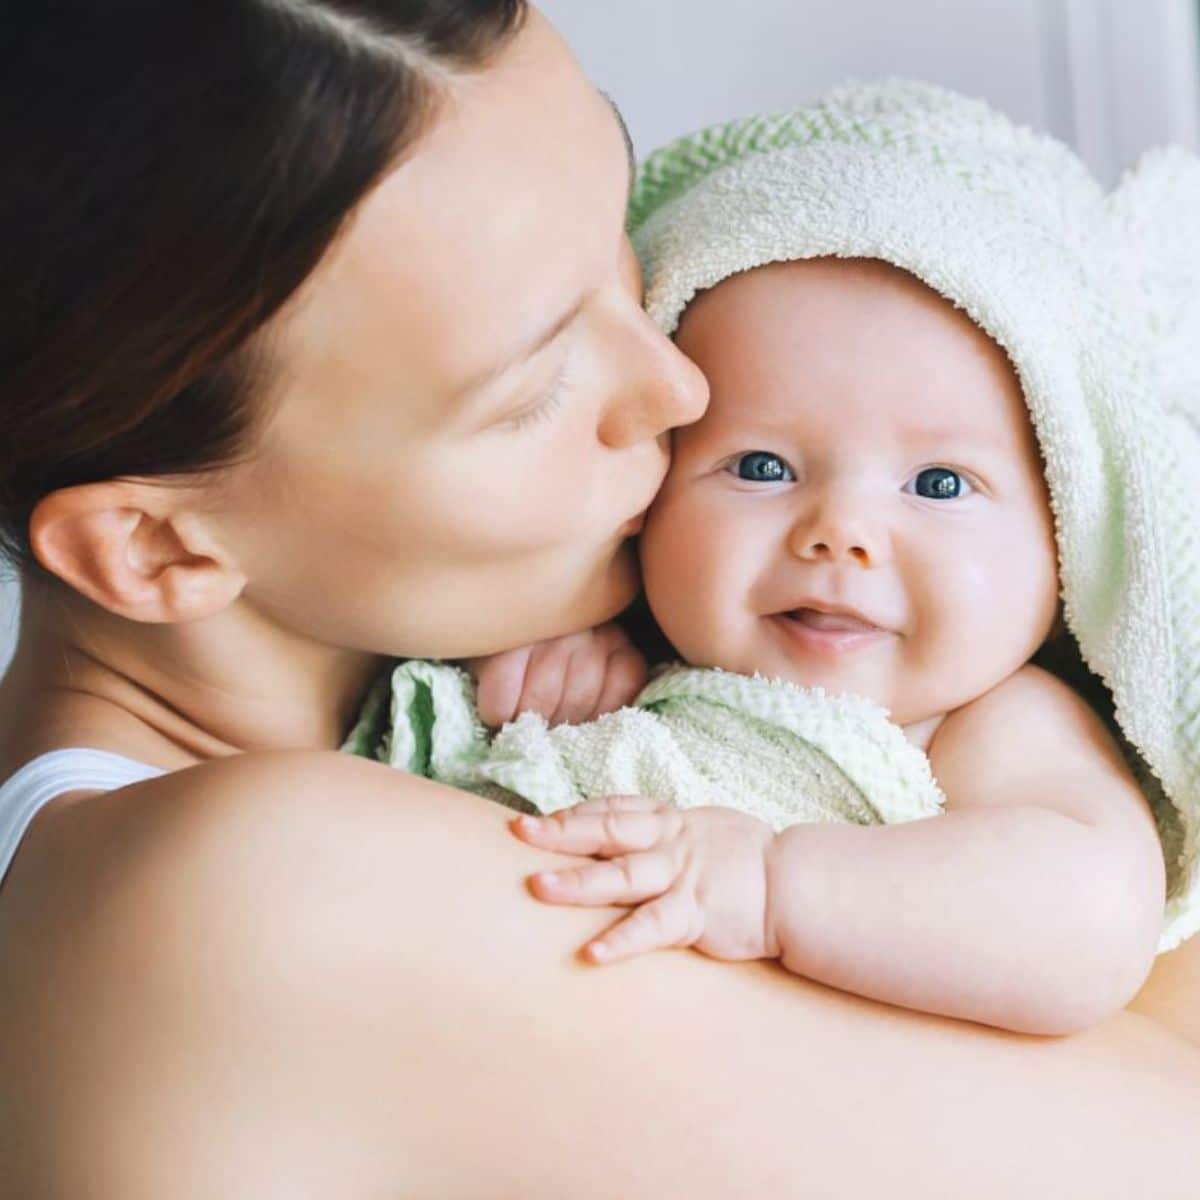 Young mother hugging and kissing her baby wrapped in a towel.